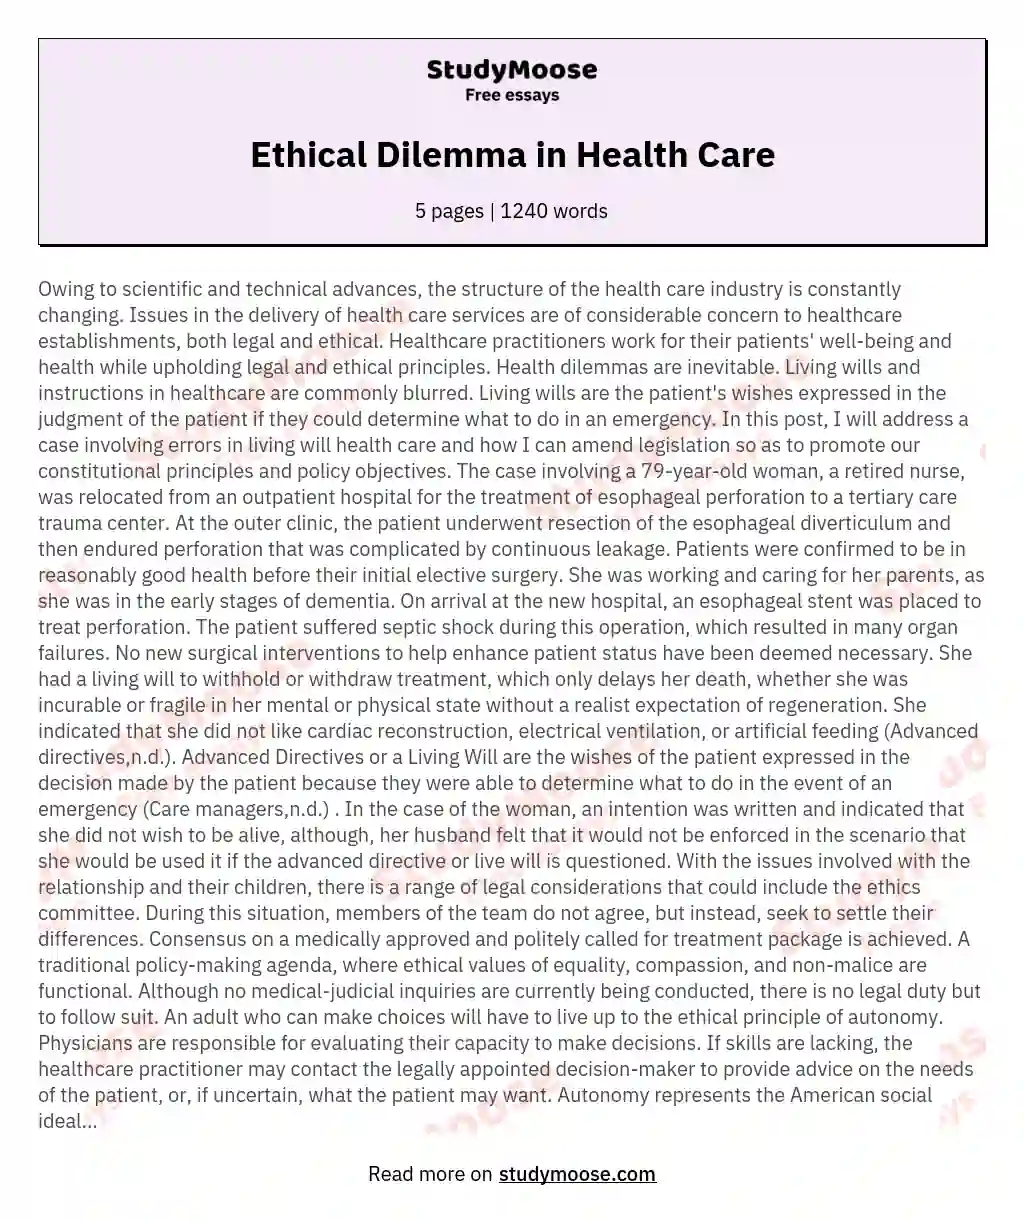 Ethical Dilemma in Health Care